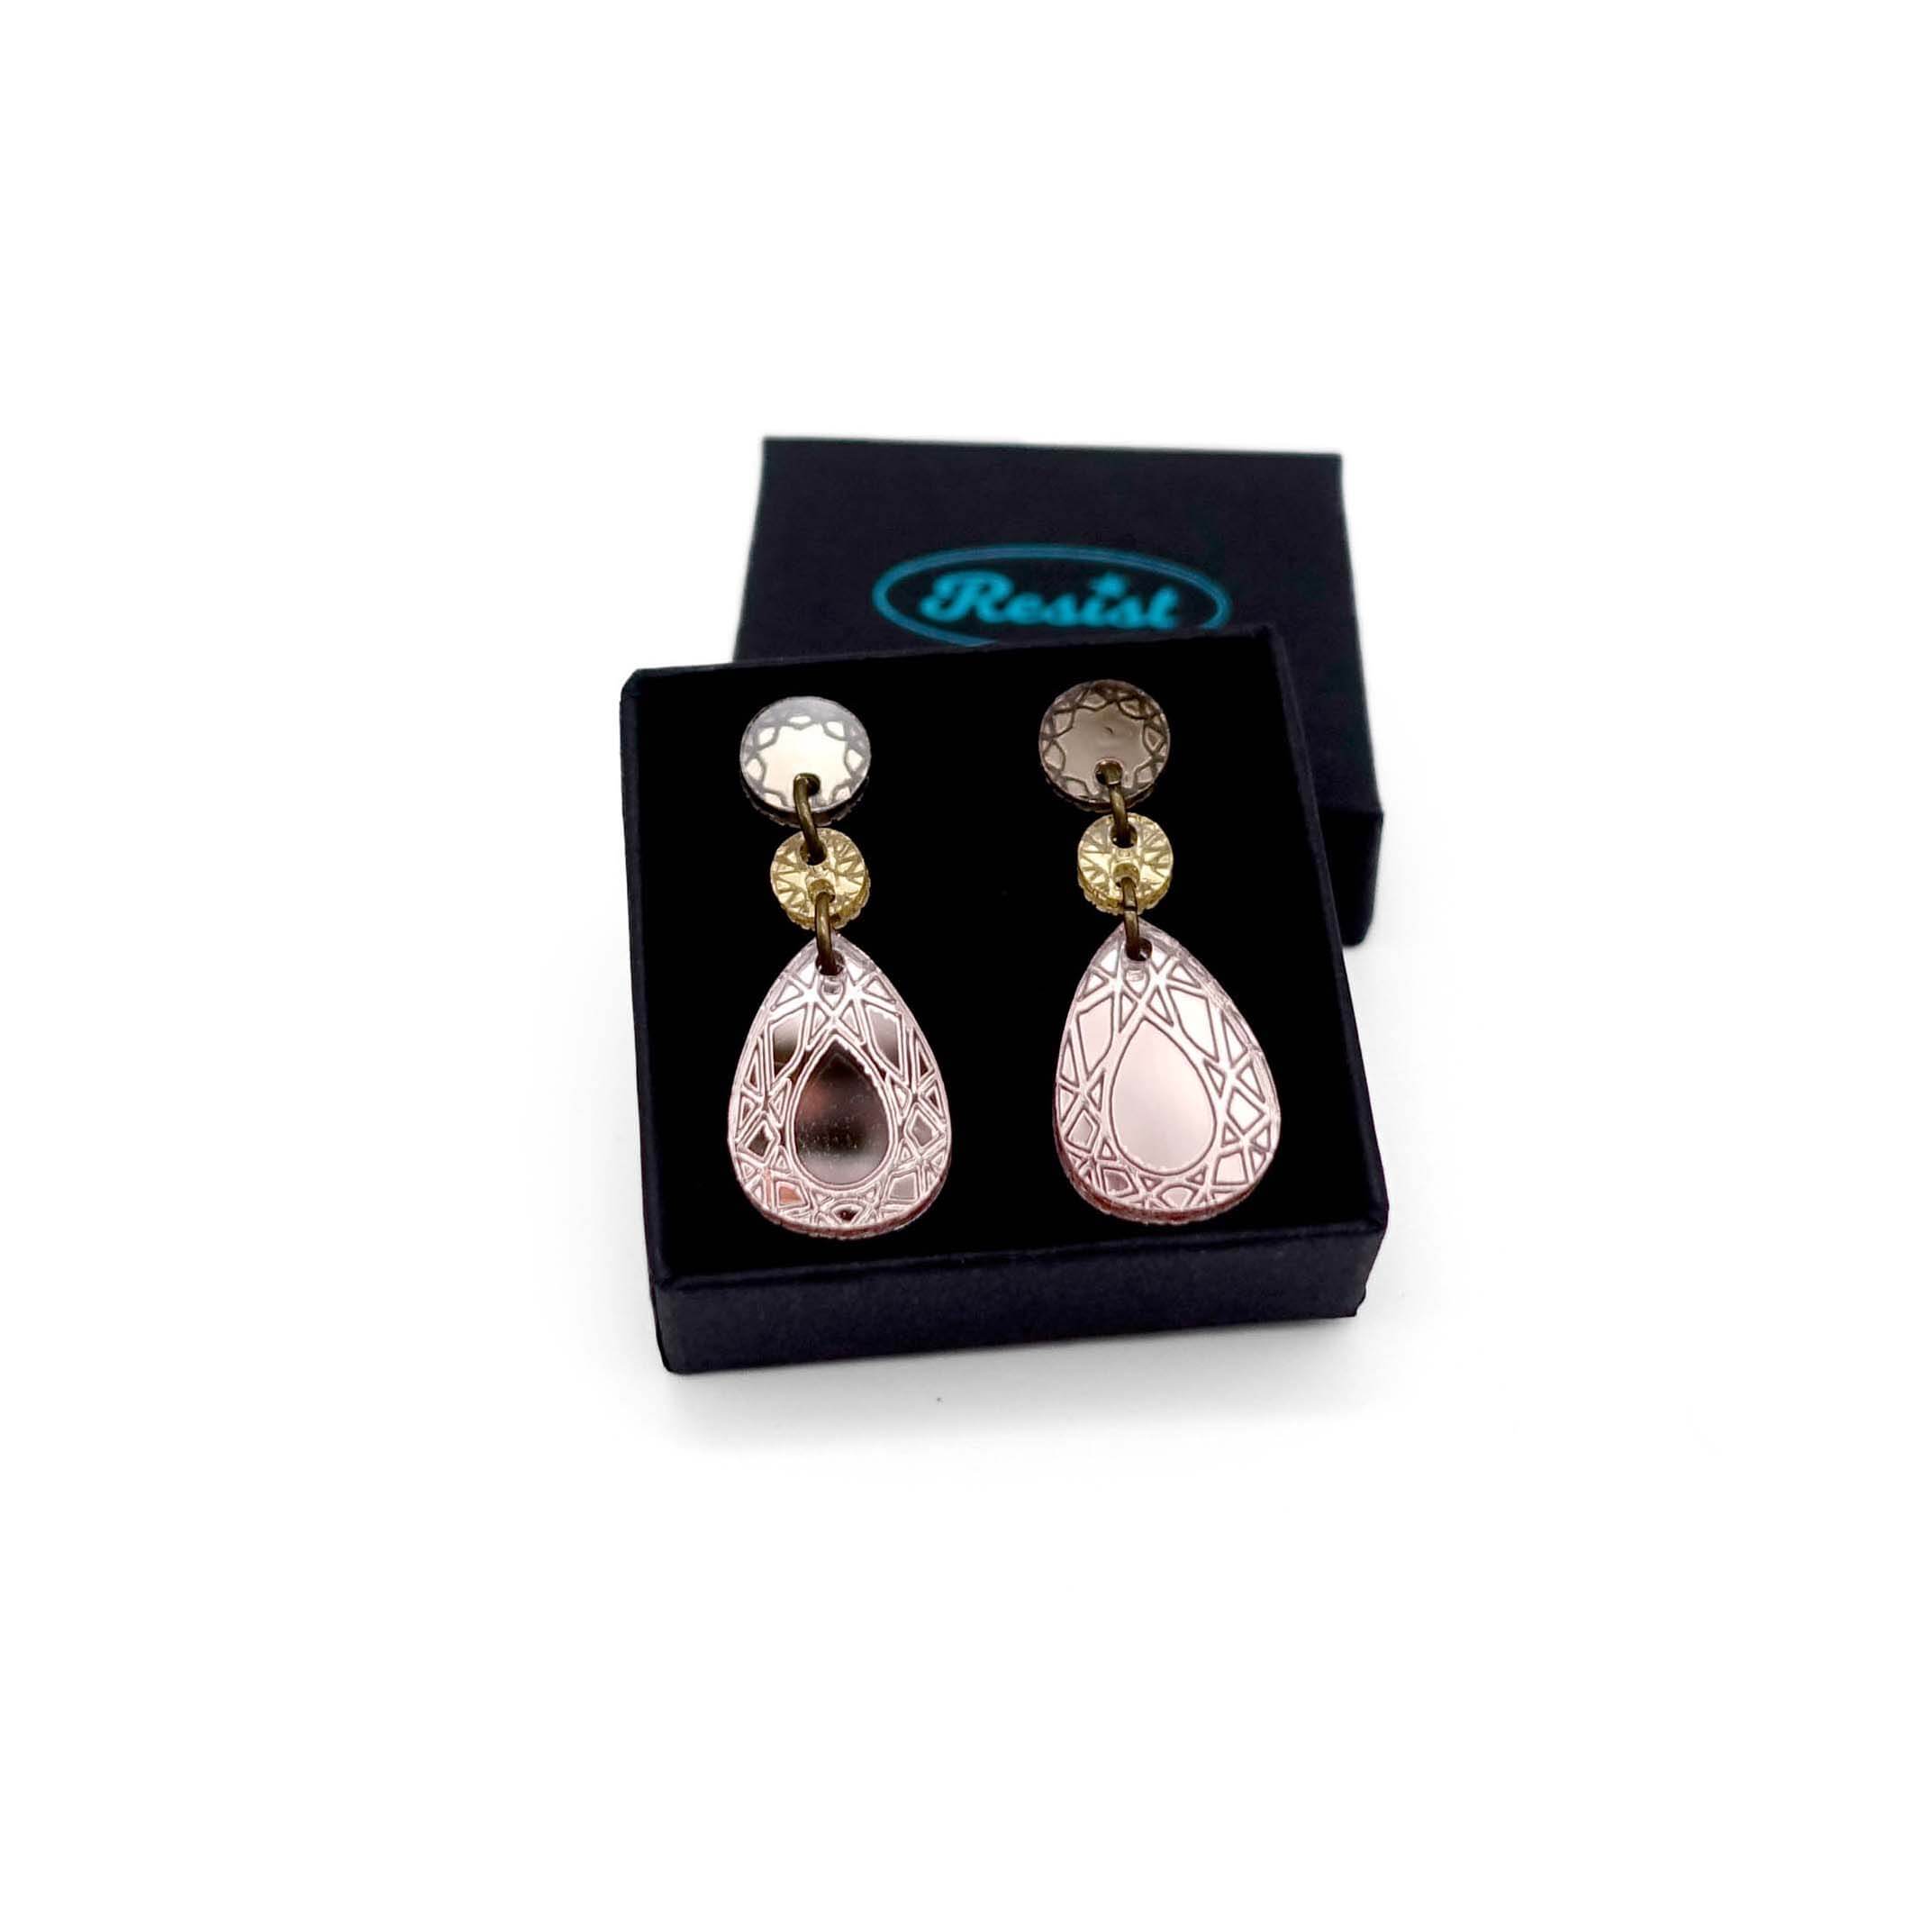 Belle Époque french drop earrings in rose gold mirror. Shown in a small Wear and Resist gift box.  